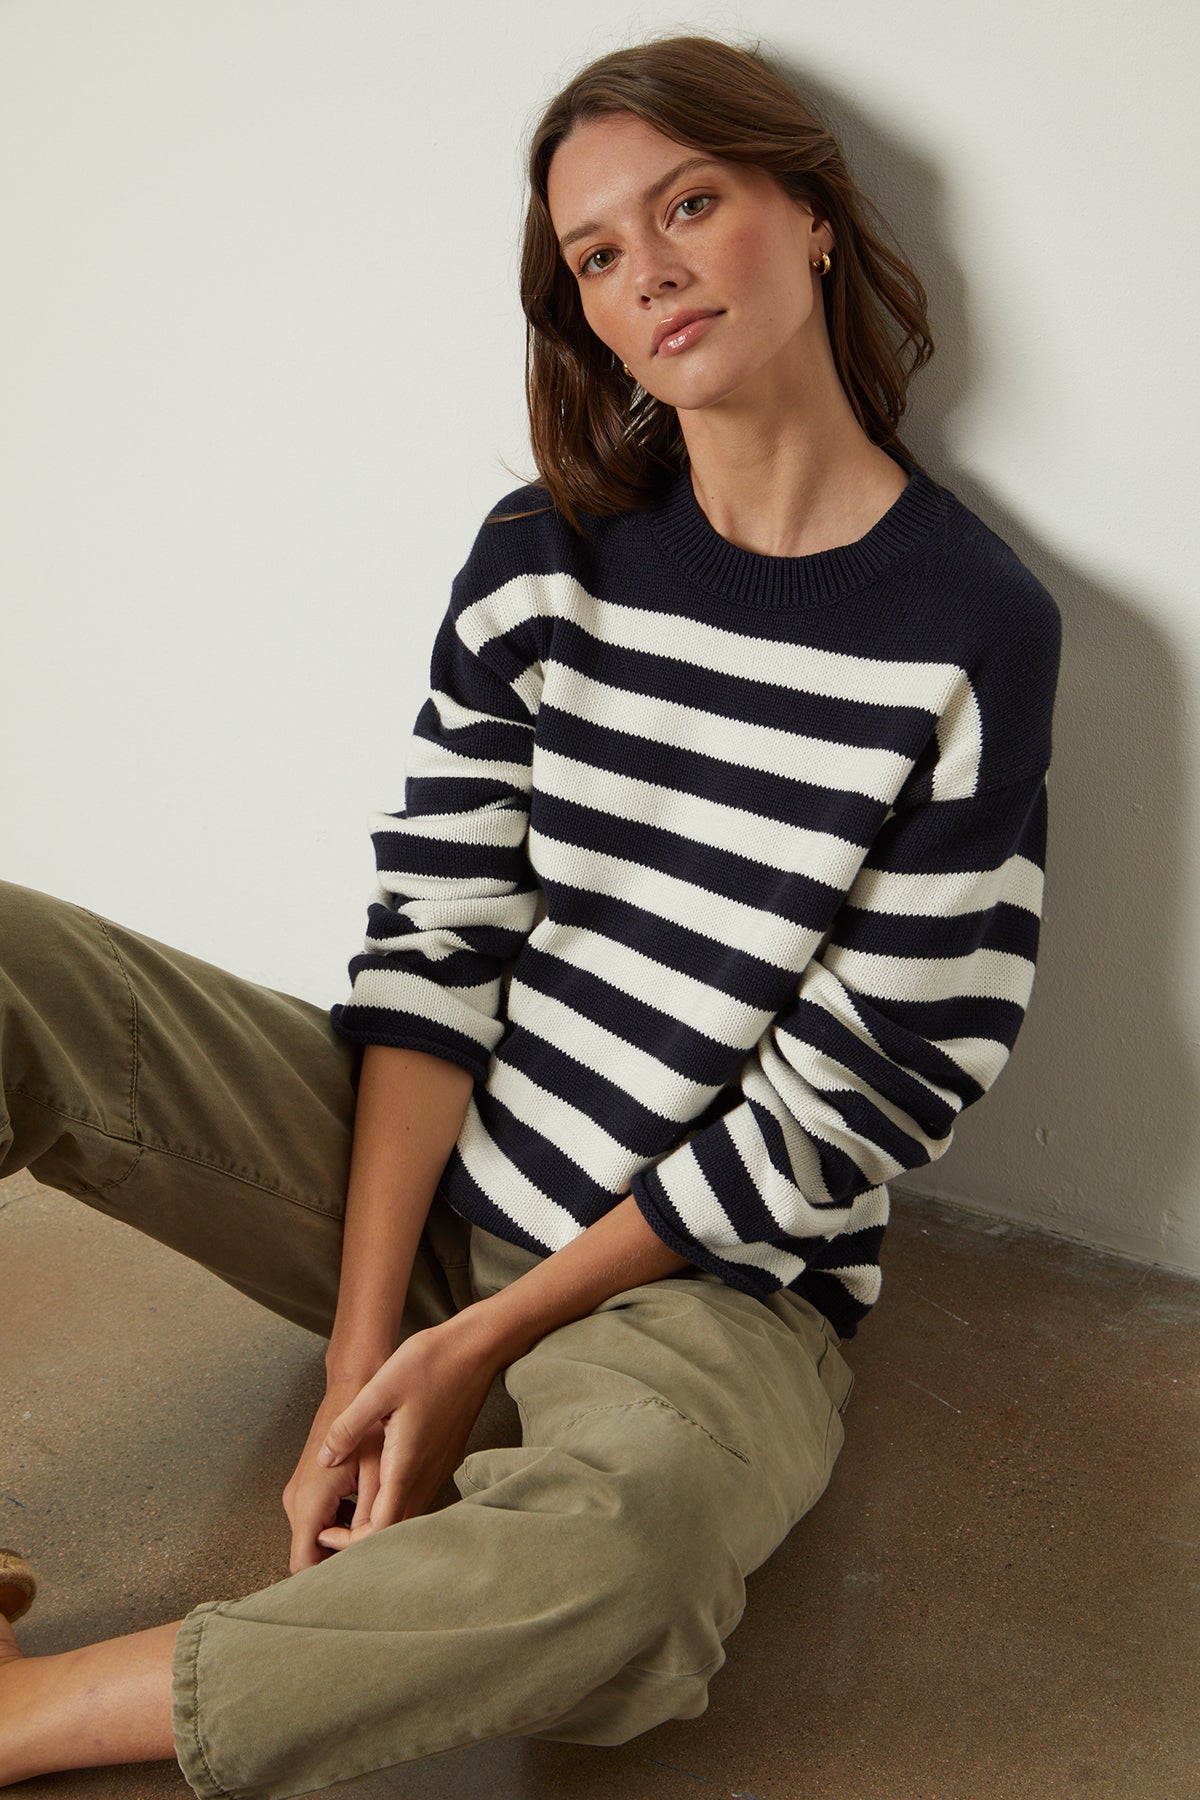   A woman wearing a Velvet by Graham & Spencer LEX STRIPED CREW NECK SWEATER and khaki pants. 